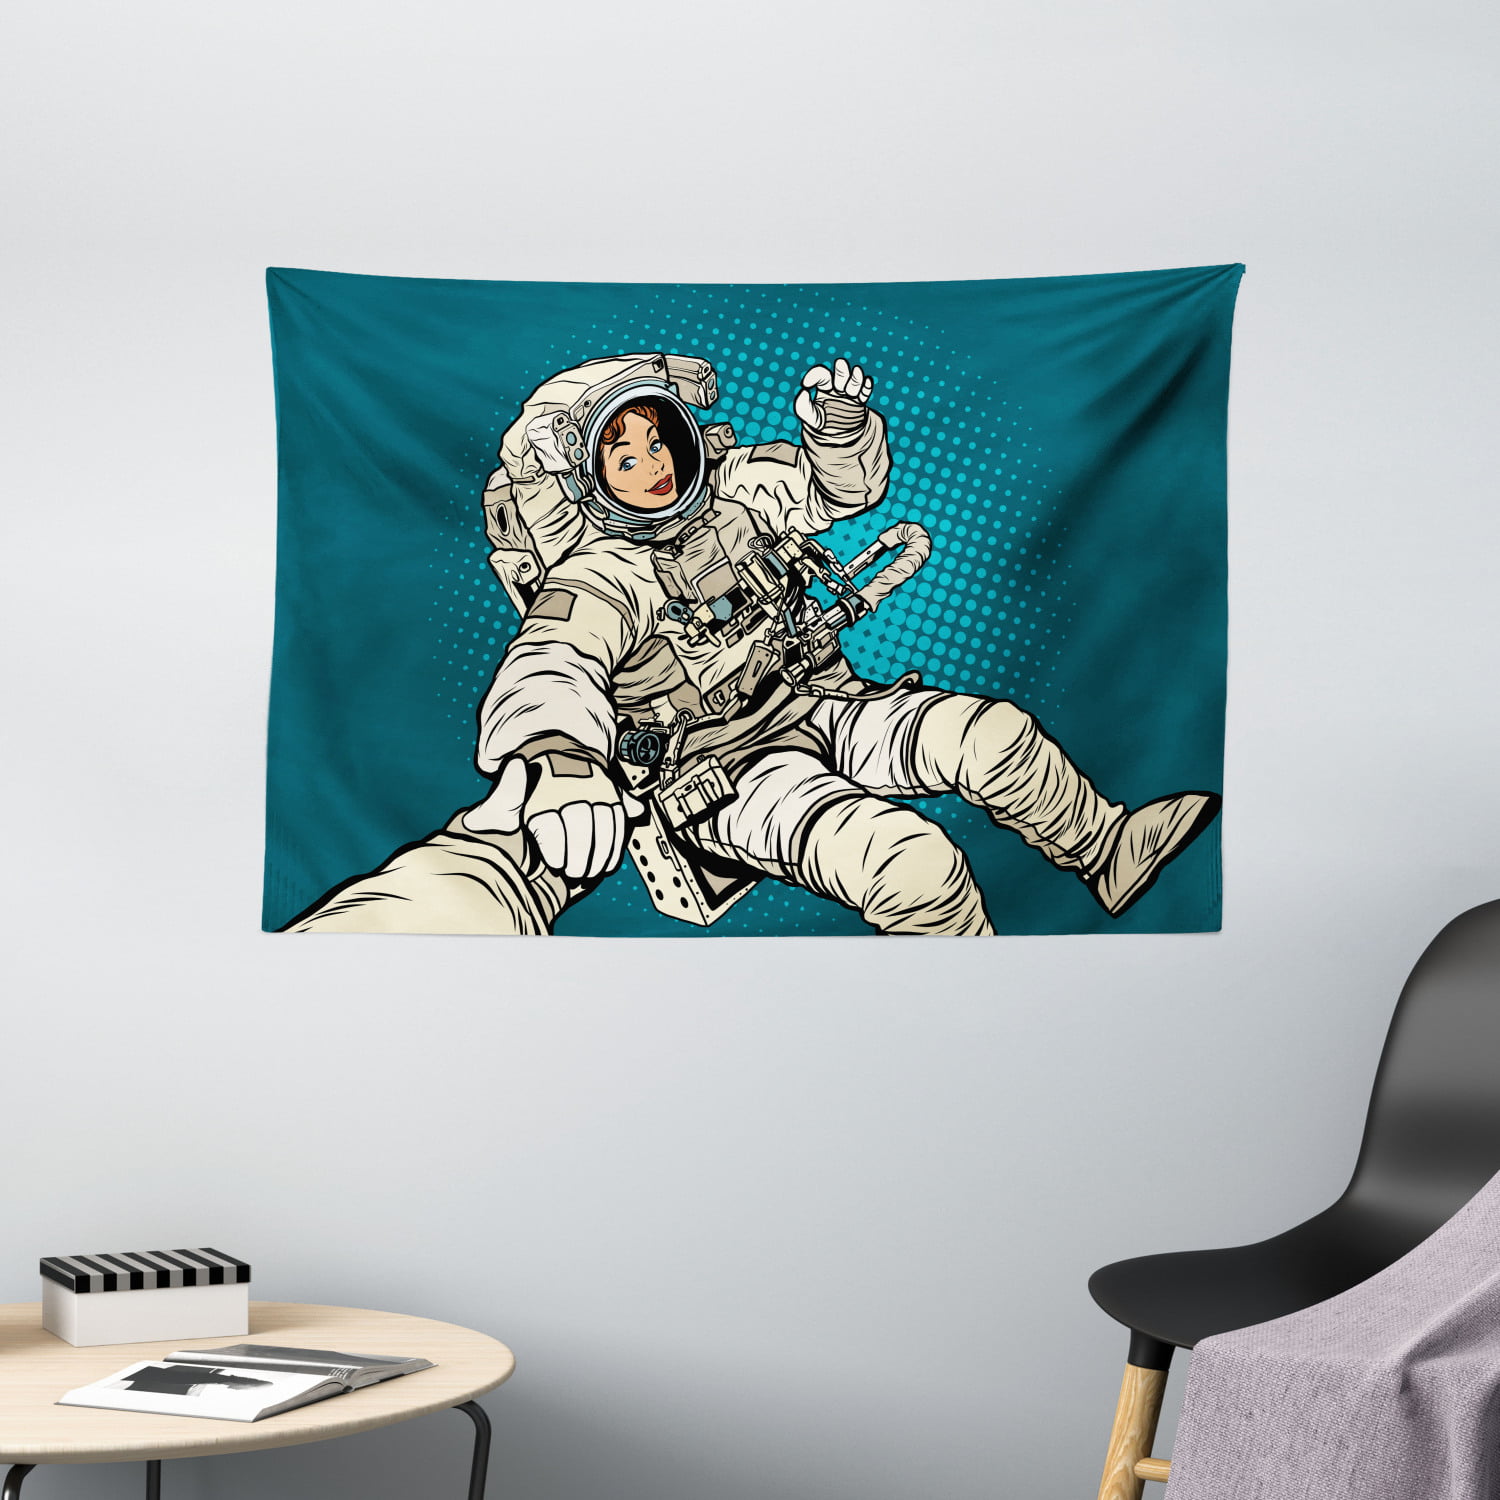 Wide Wall Hanging for Bedroom Living Room Dorm 60 X 40 Beige Blue Woman Astronaut Hands with Her Better Half Pop Art Style Comic Graphic Ambesonne Outer Space Tapestry